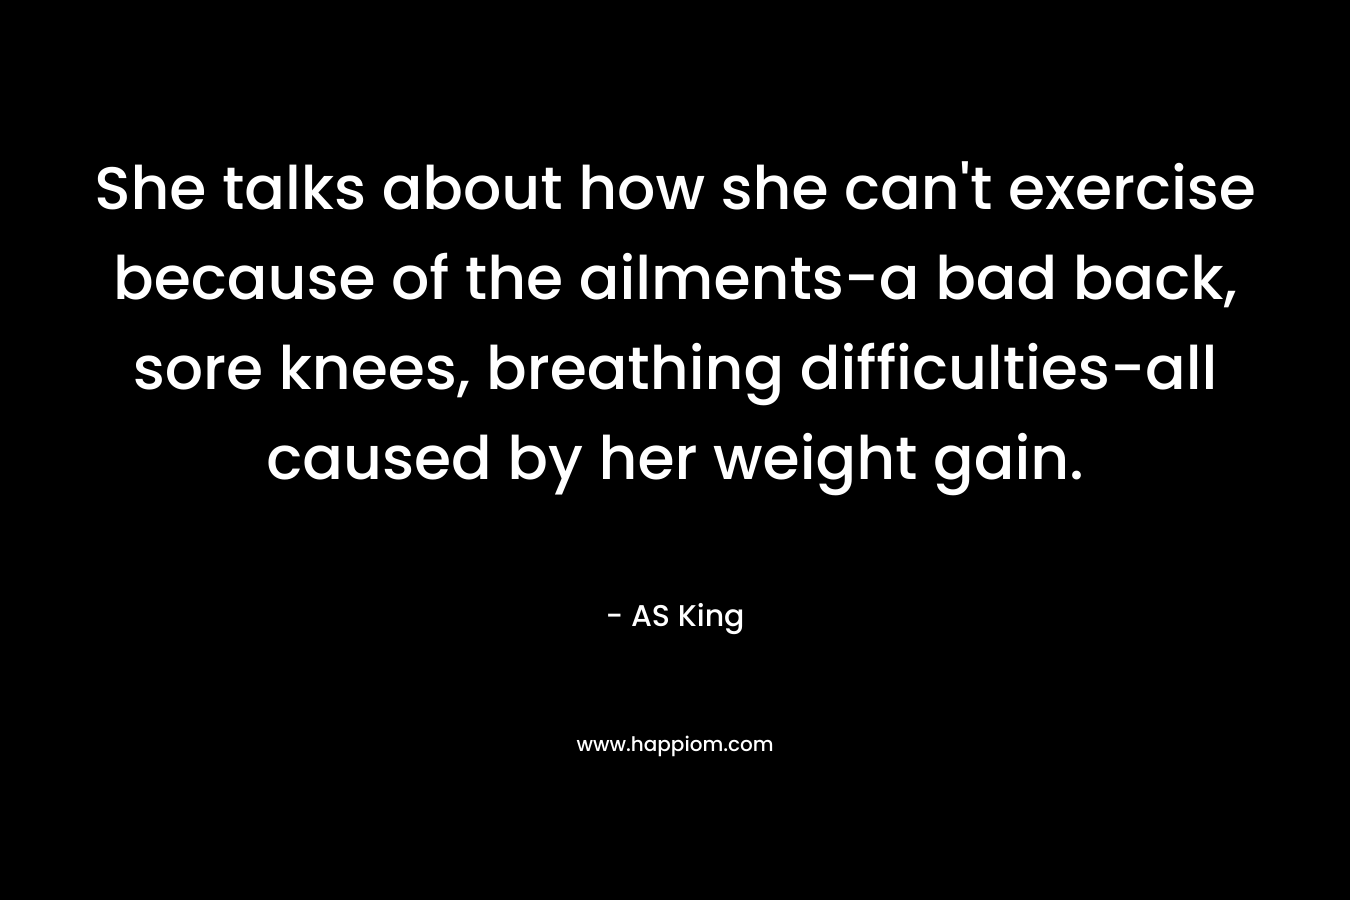 She talks about how she can’t exercise because of the ailments-a bad back, sore knees, breathing difficulties-all caused by her weight gain. – AS King